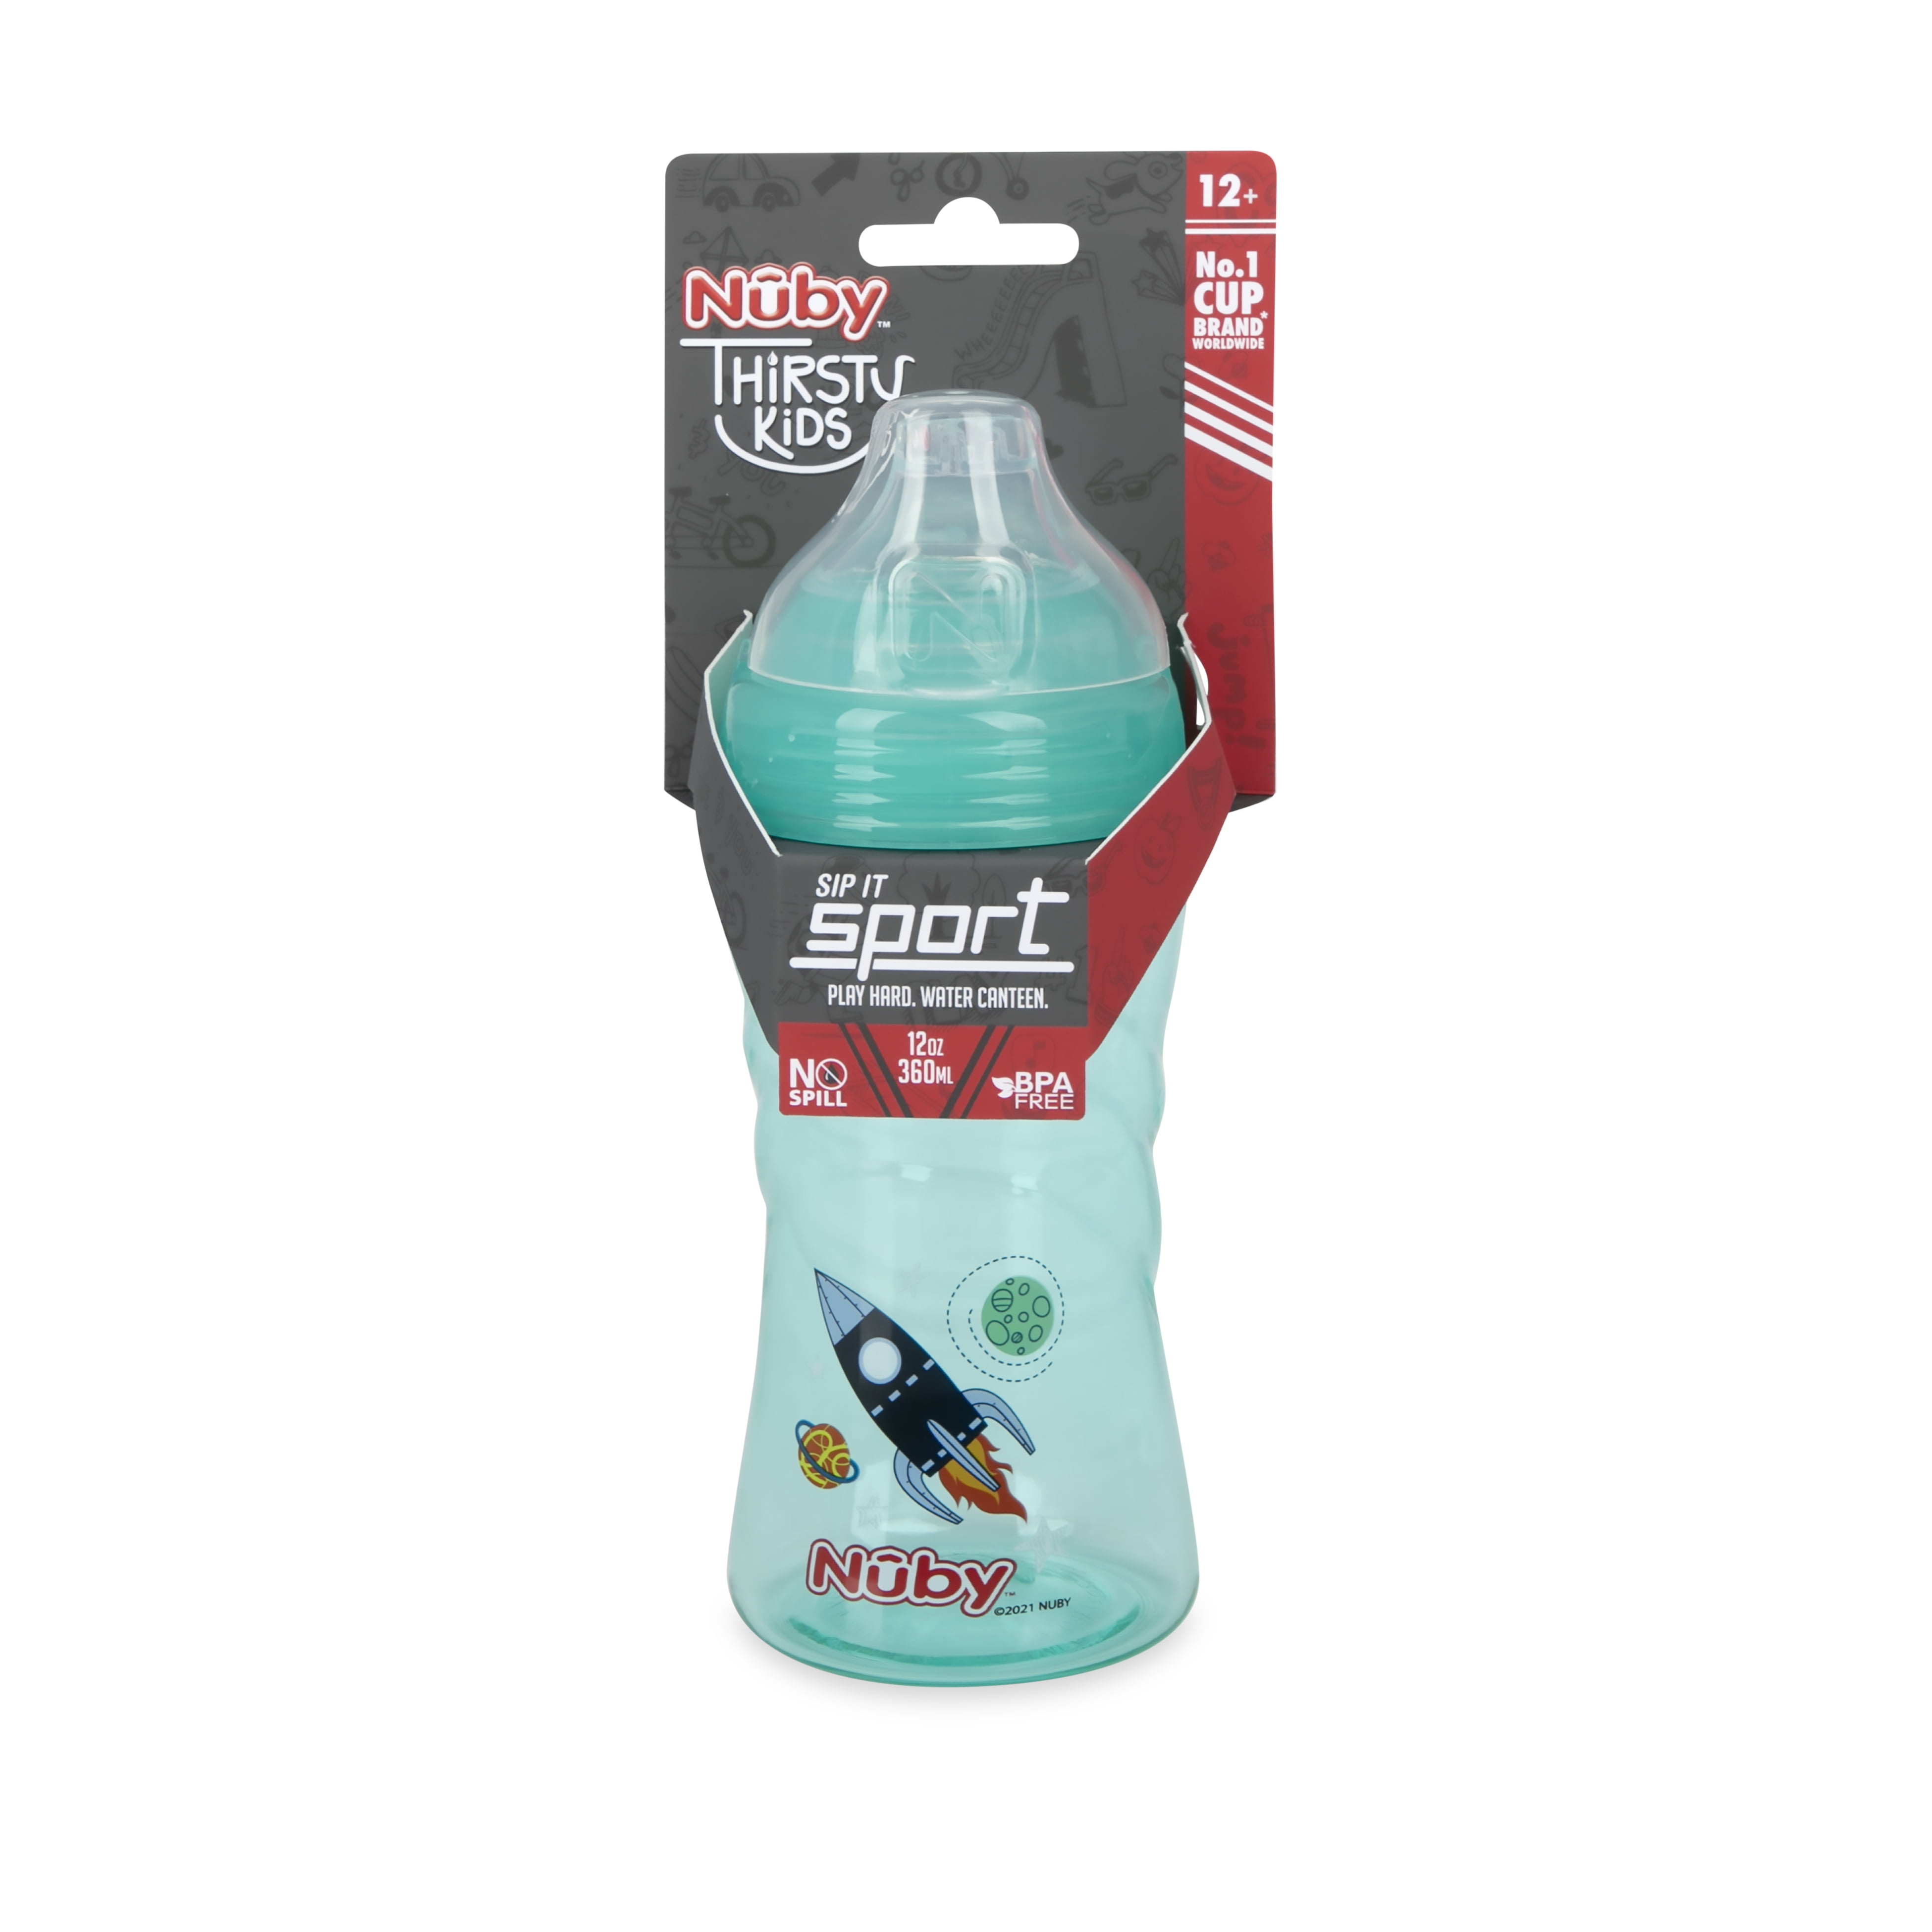 Detroit Pistons NBA Basketball Kids 9oz. No-Spill Sippy Cup NEW SEALED